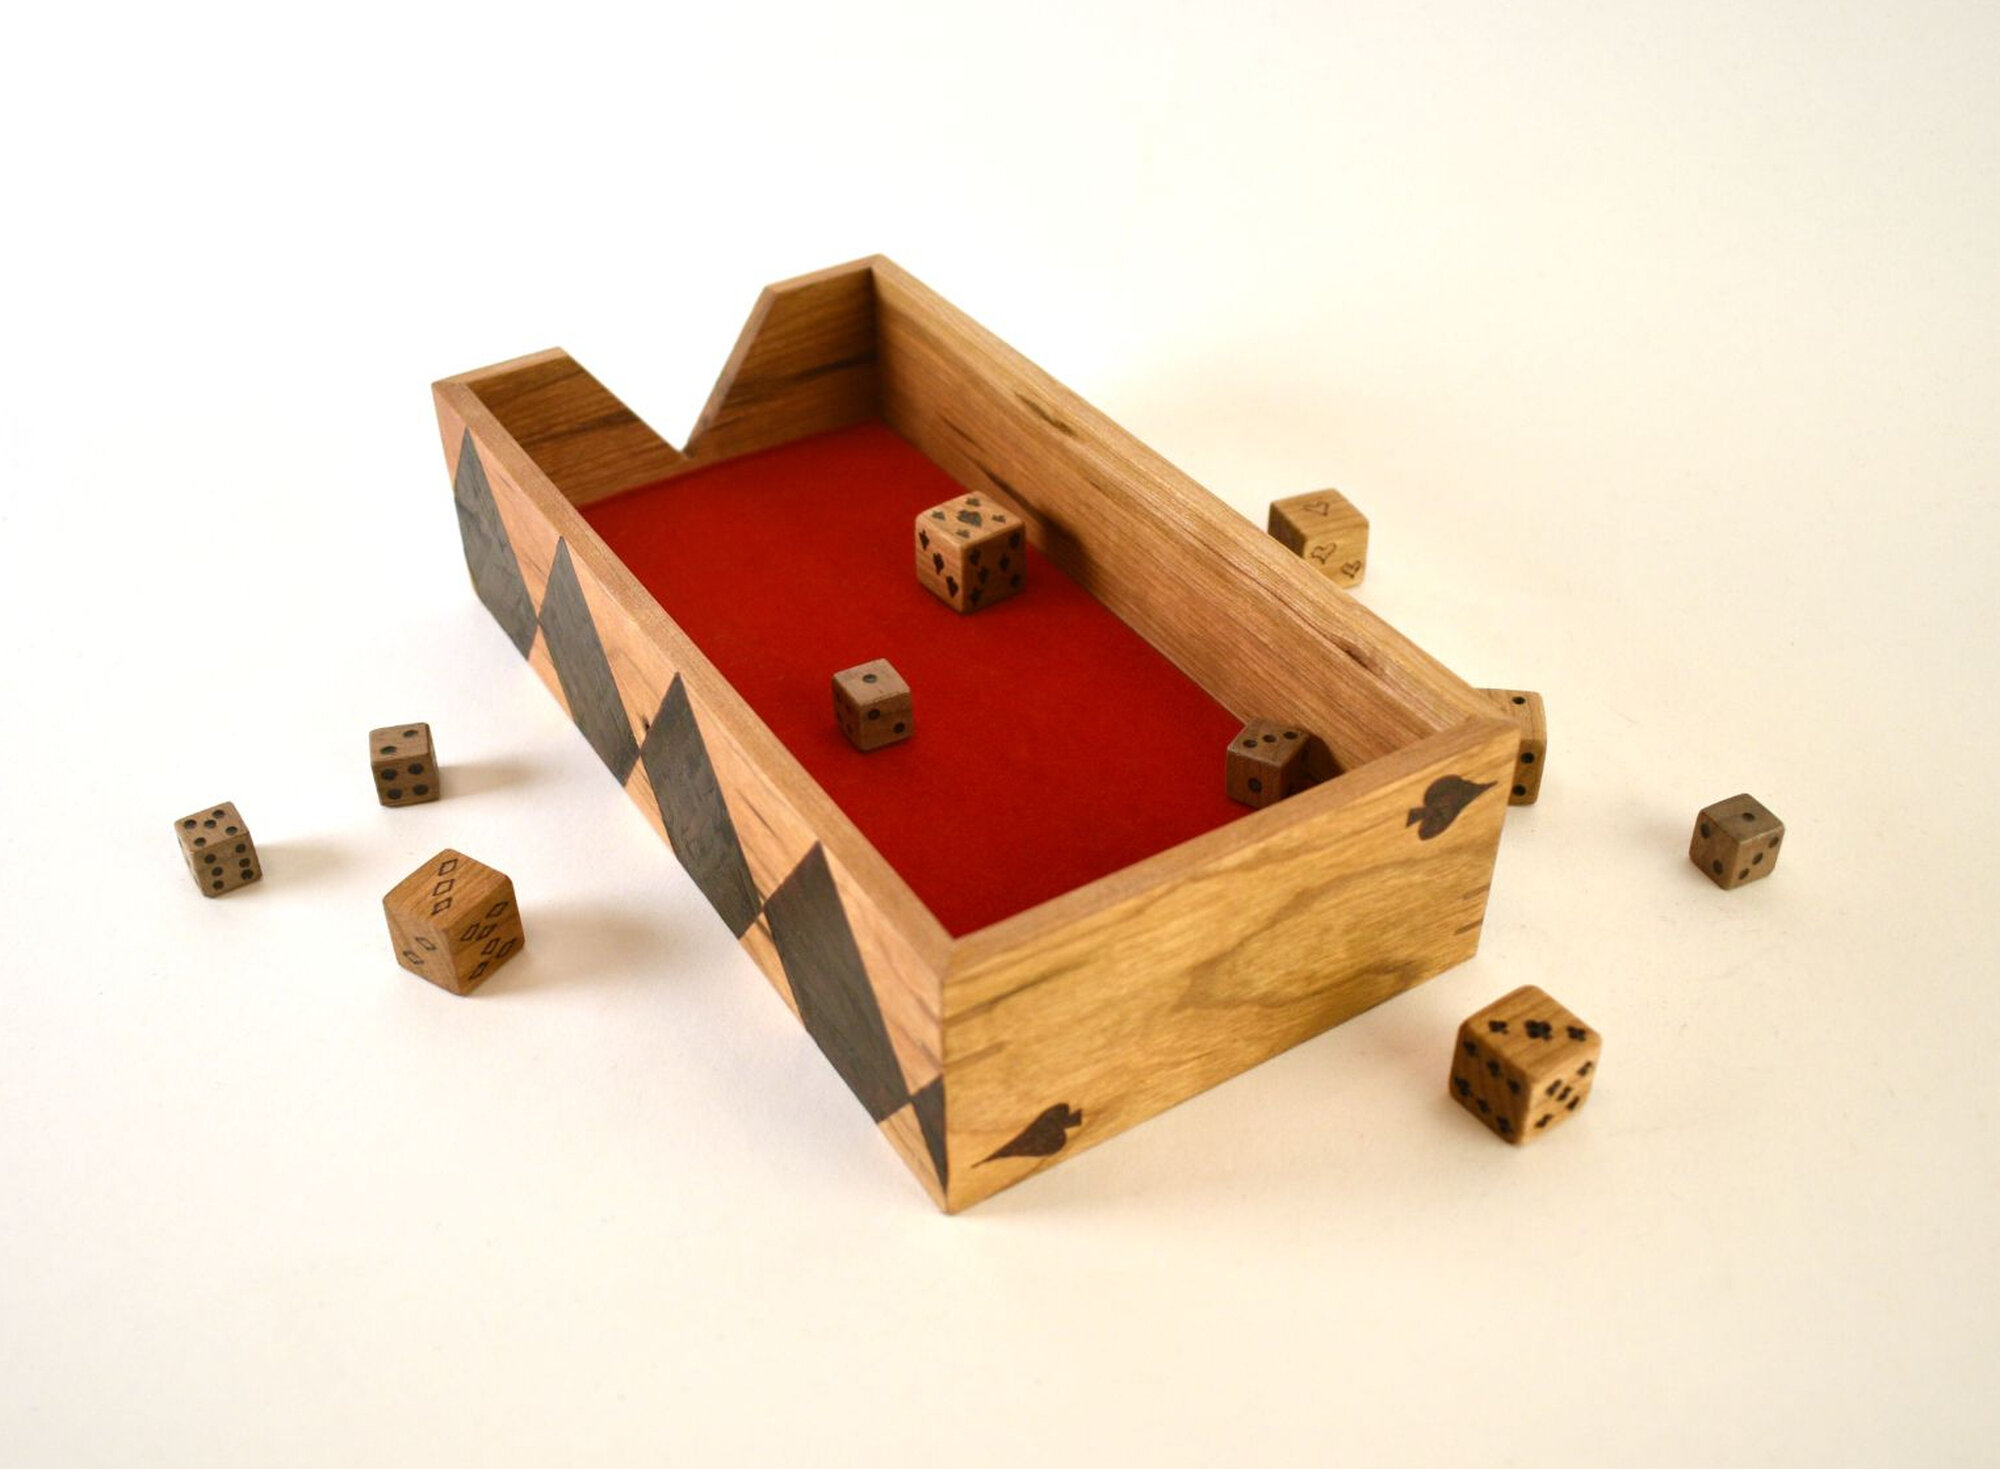 Card Suit Dice Box with Wooden Dice